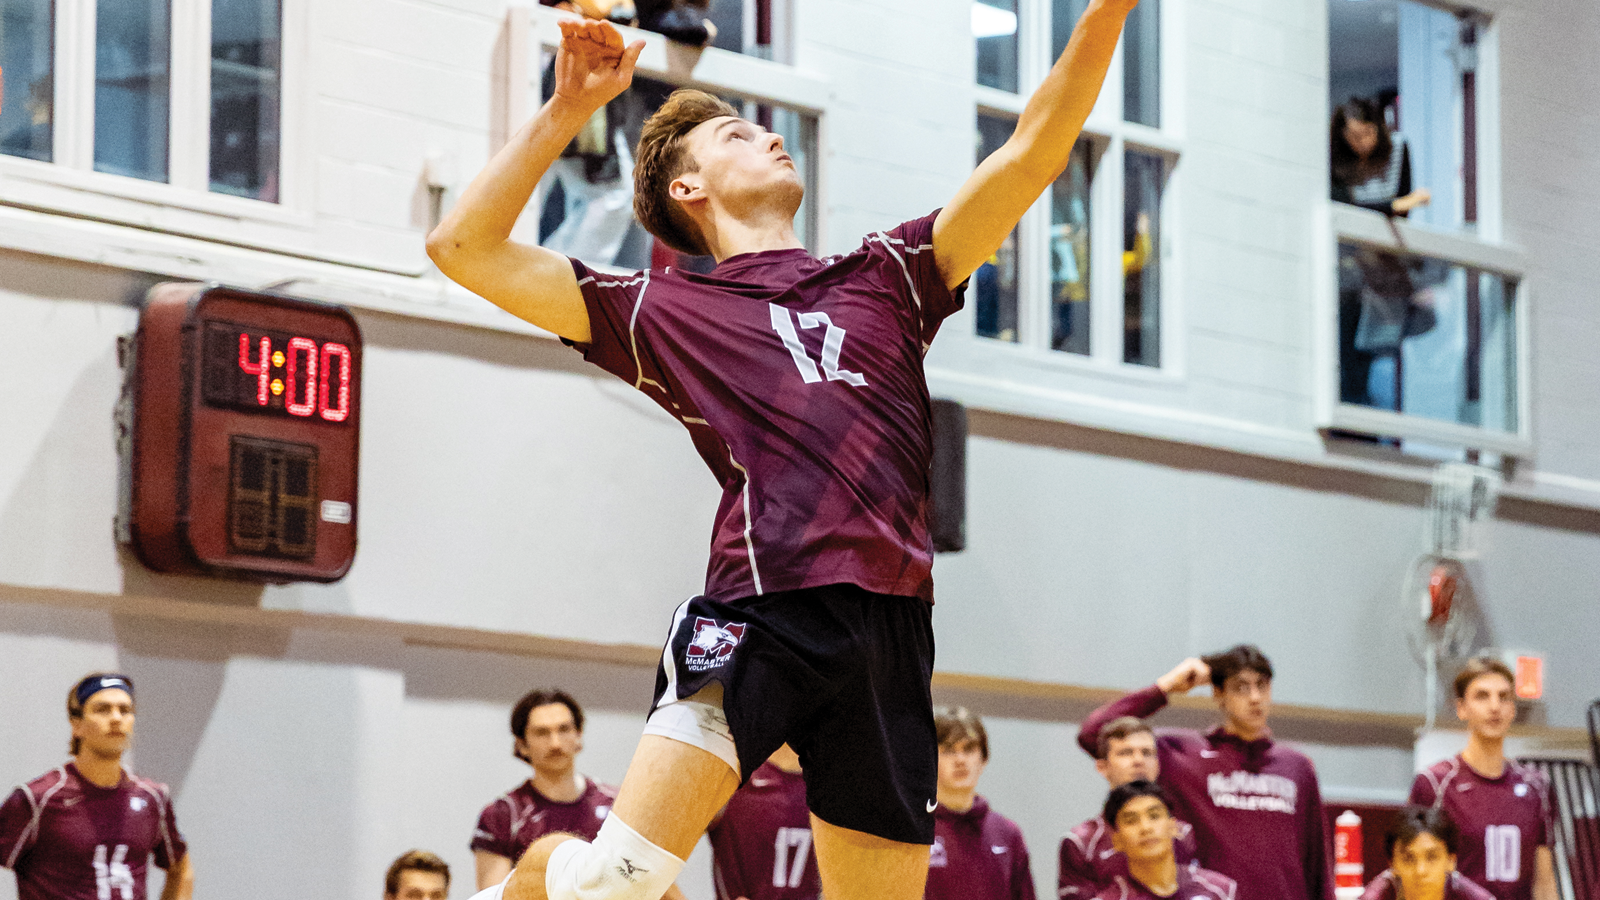 McMaster men's volleyball player Brady Paterson jumping in the air to serve the ball during a game